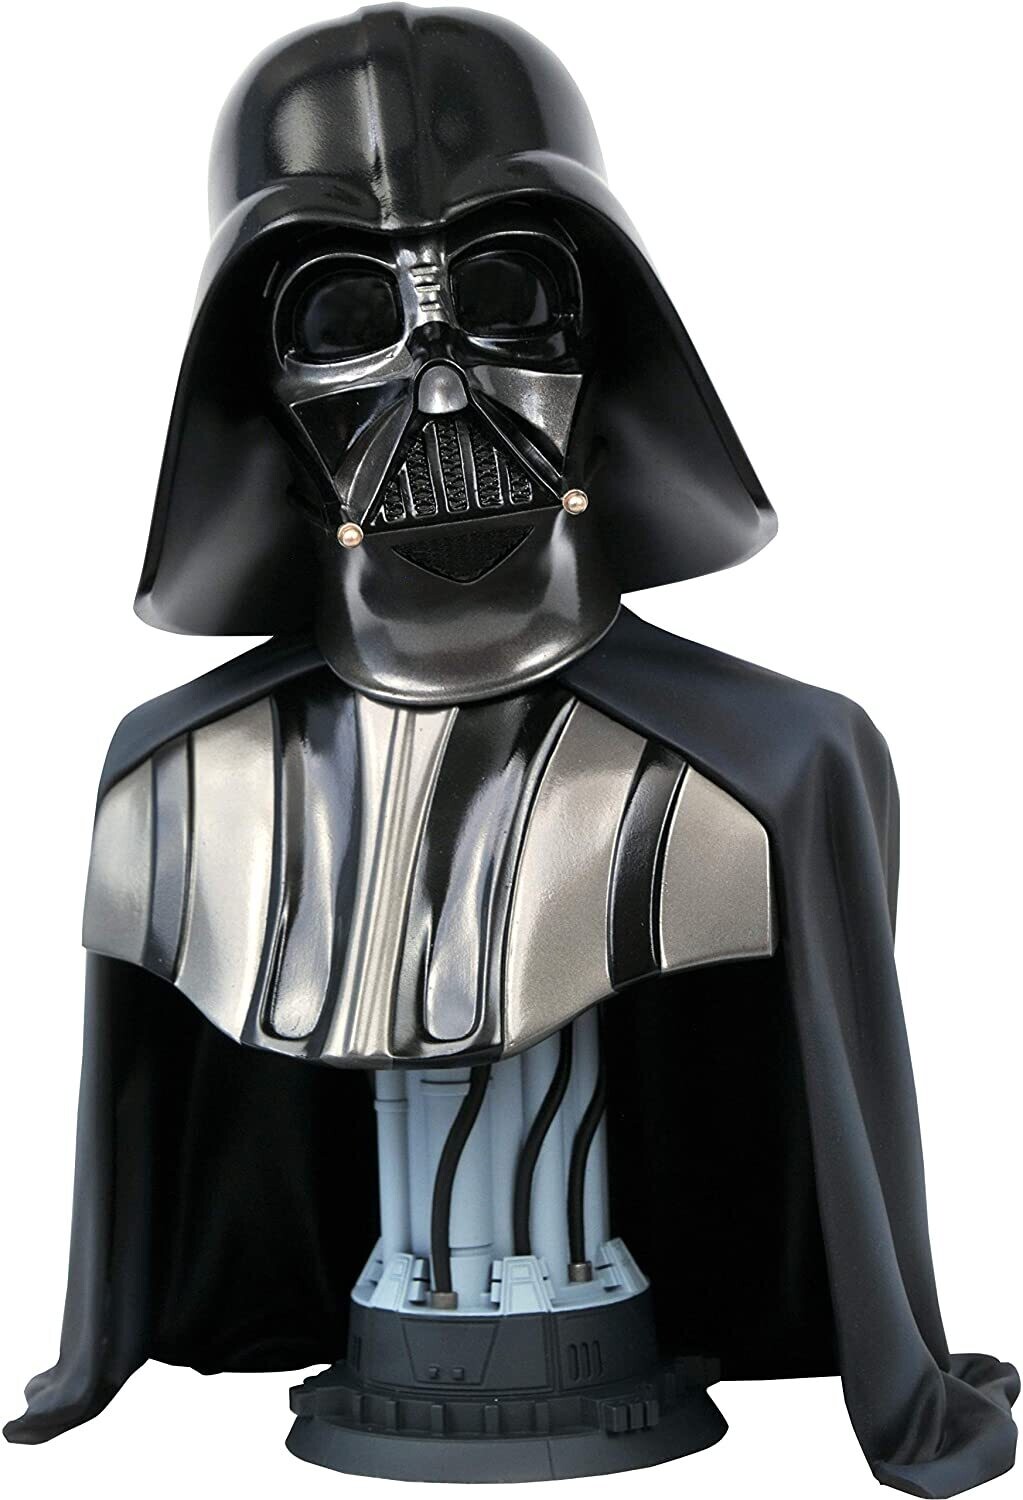 Star Wars Legends in 3D Darth Vader 1/2 scale Limited Edition Bust